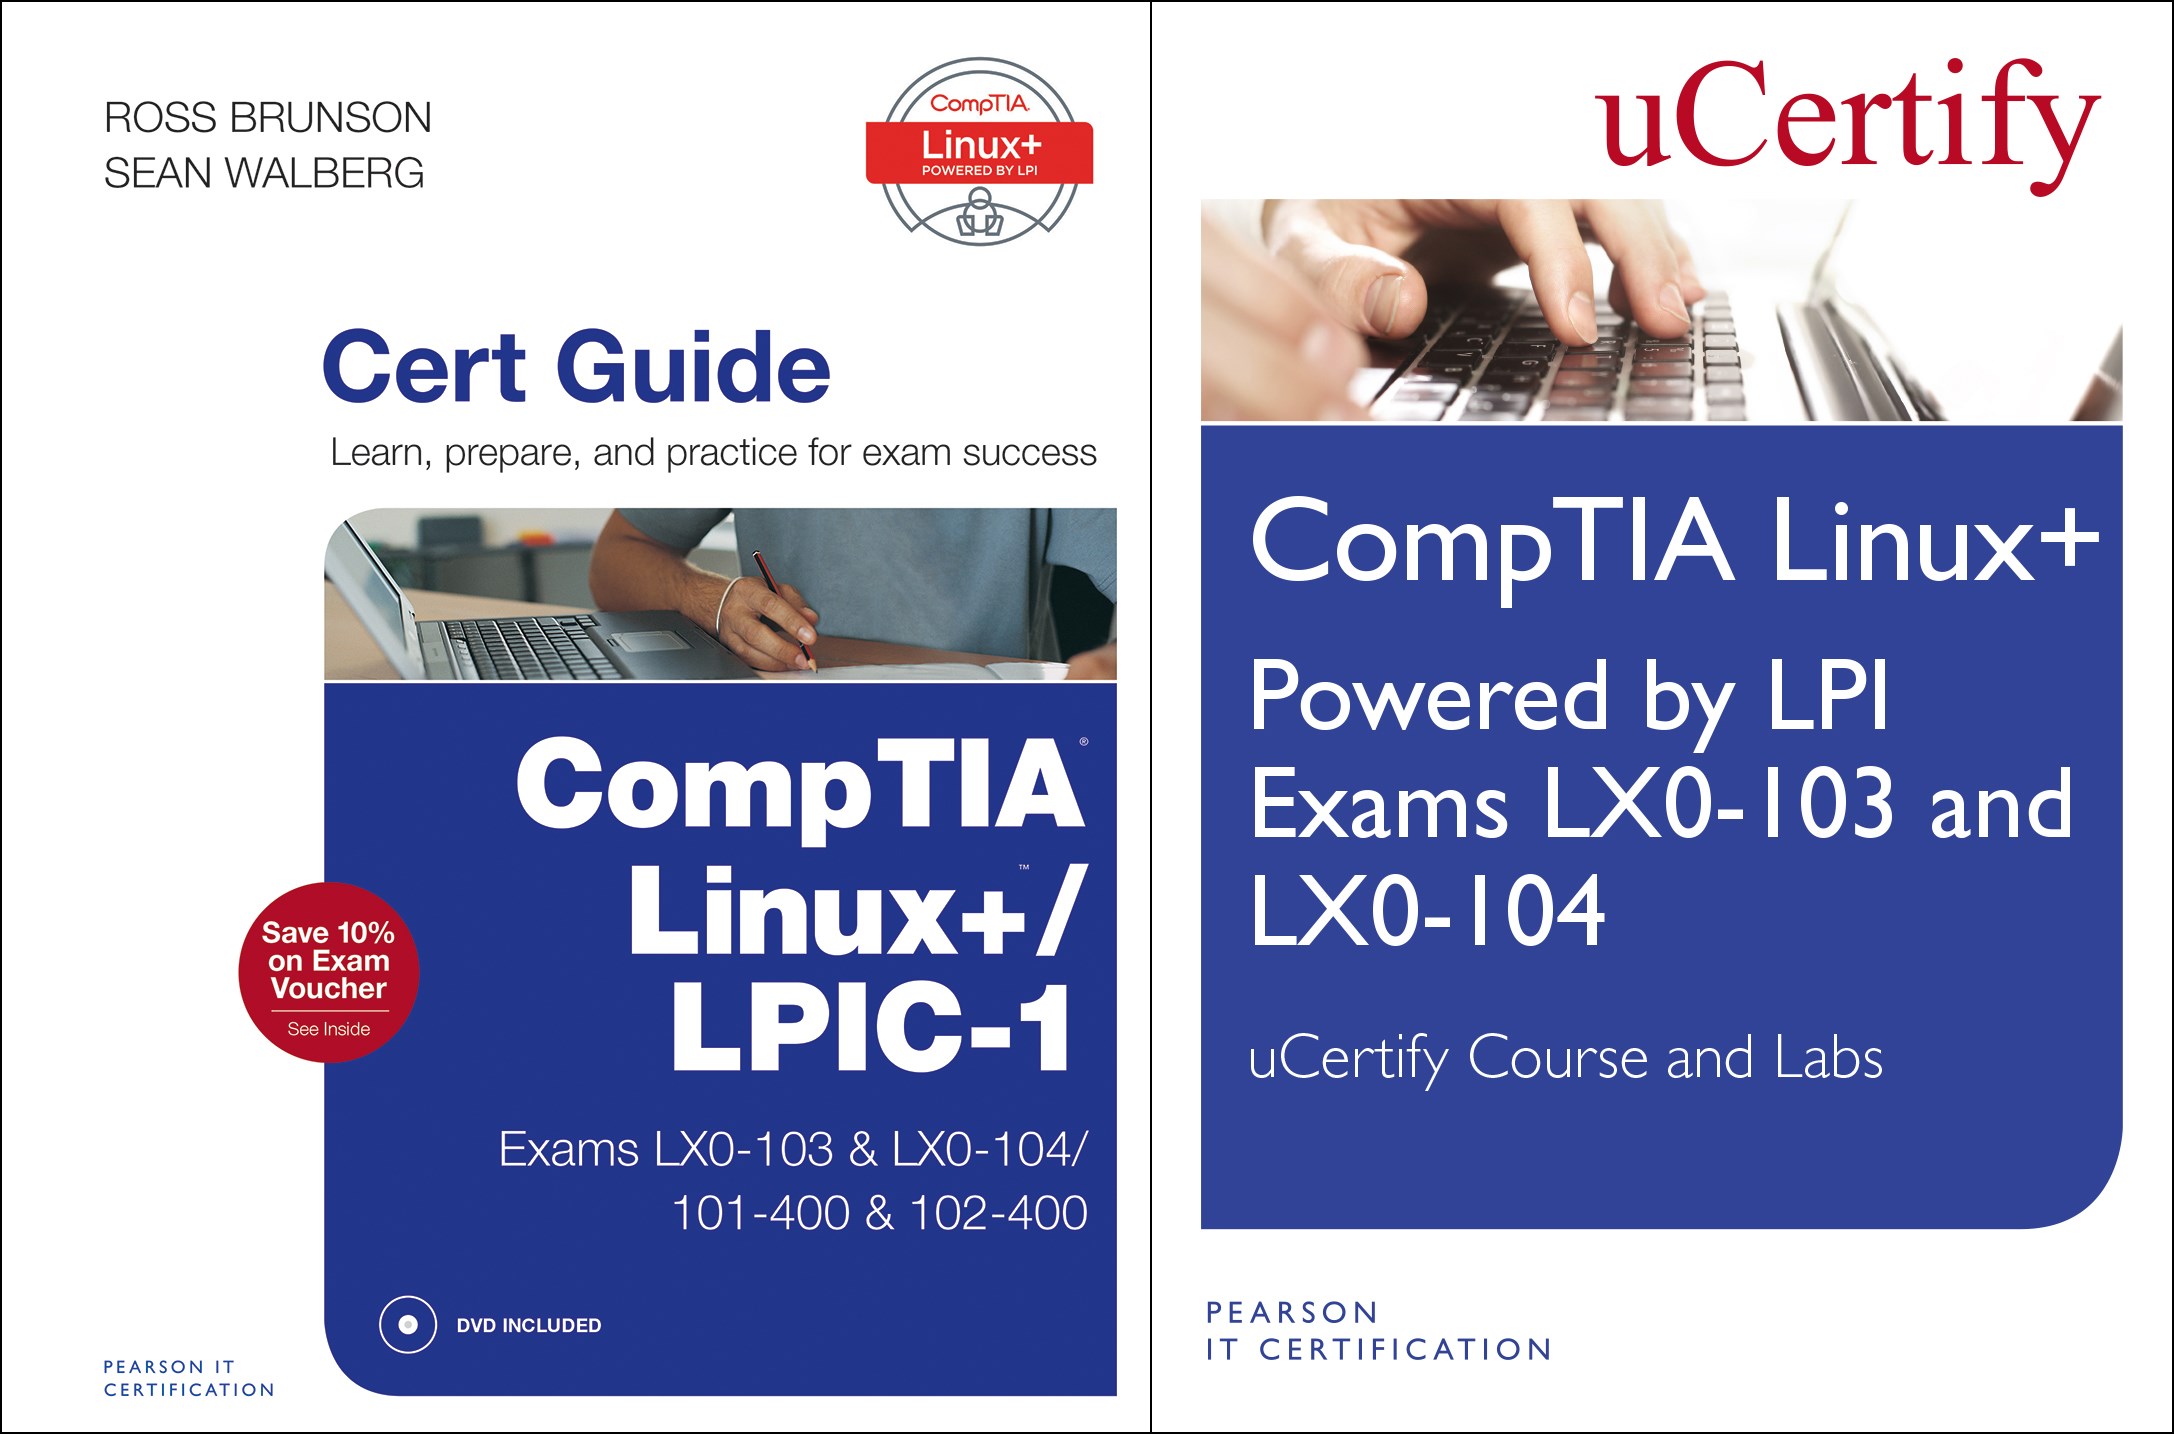 Linux+ Powered by LPI Exams LX0-103 and LX0-004 uCertify Course and Labs and CompTIA Linux+/LPIC-1 Cert Guide Bundle